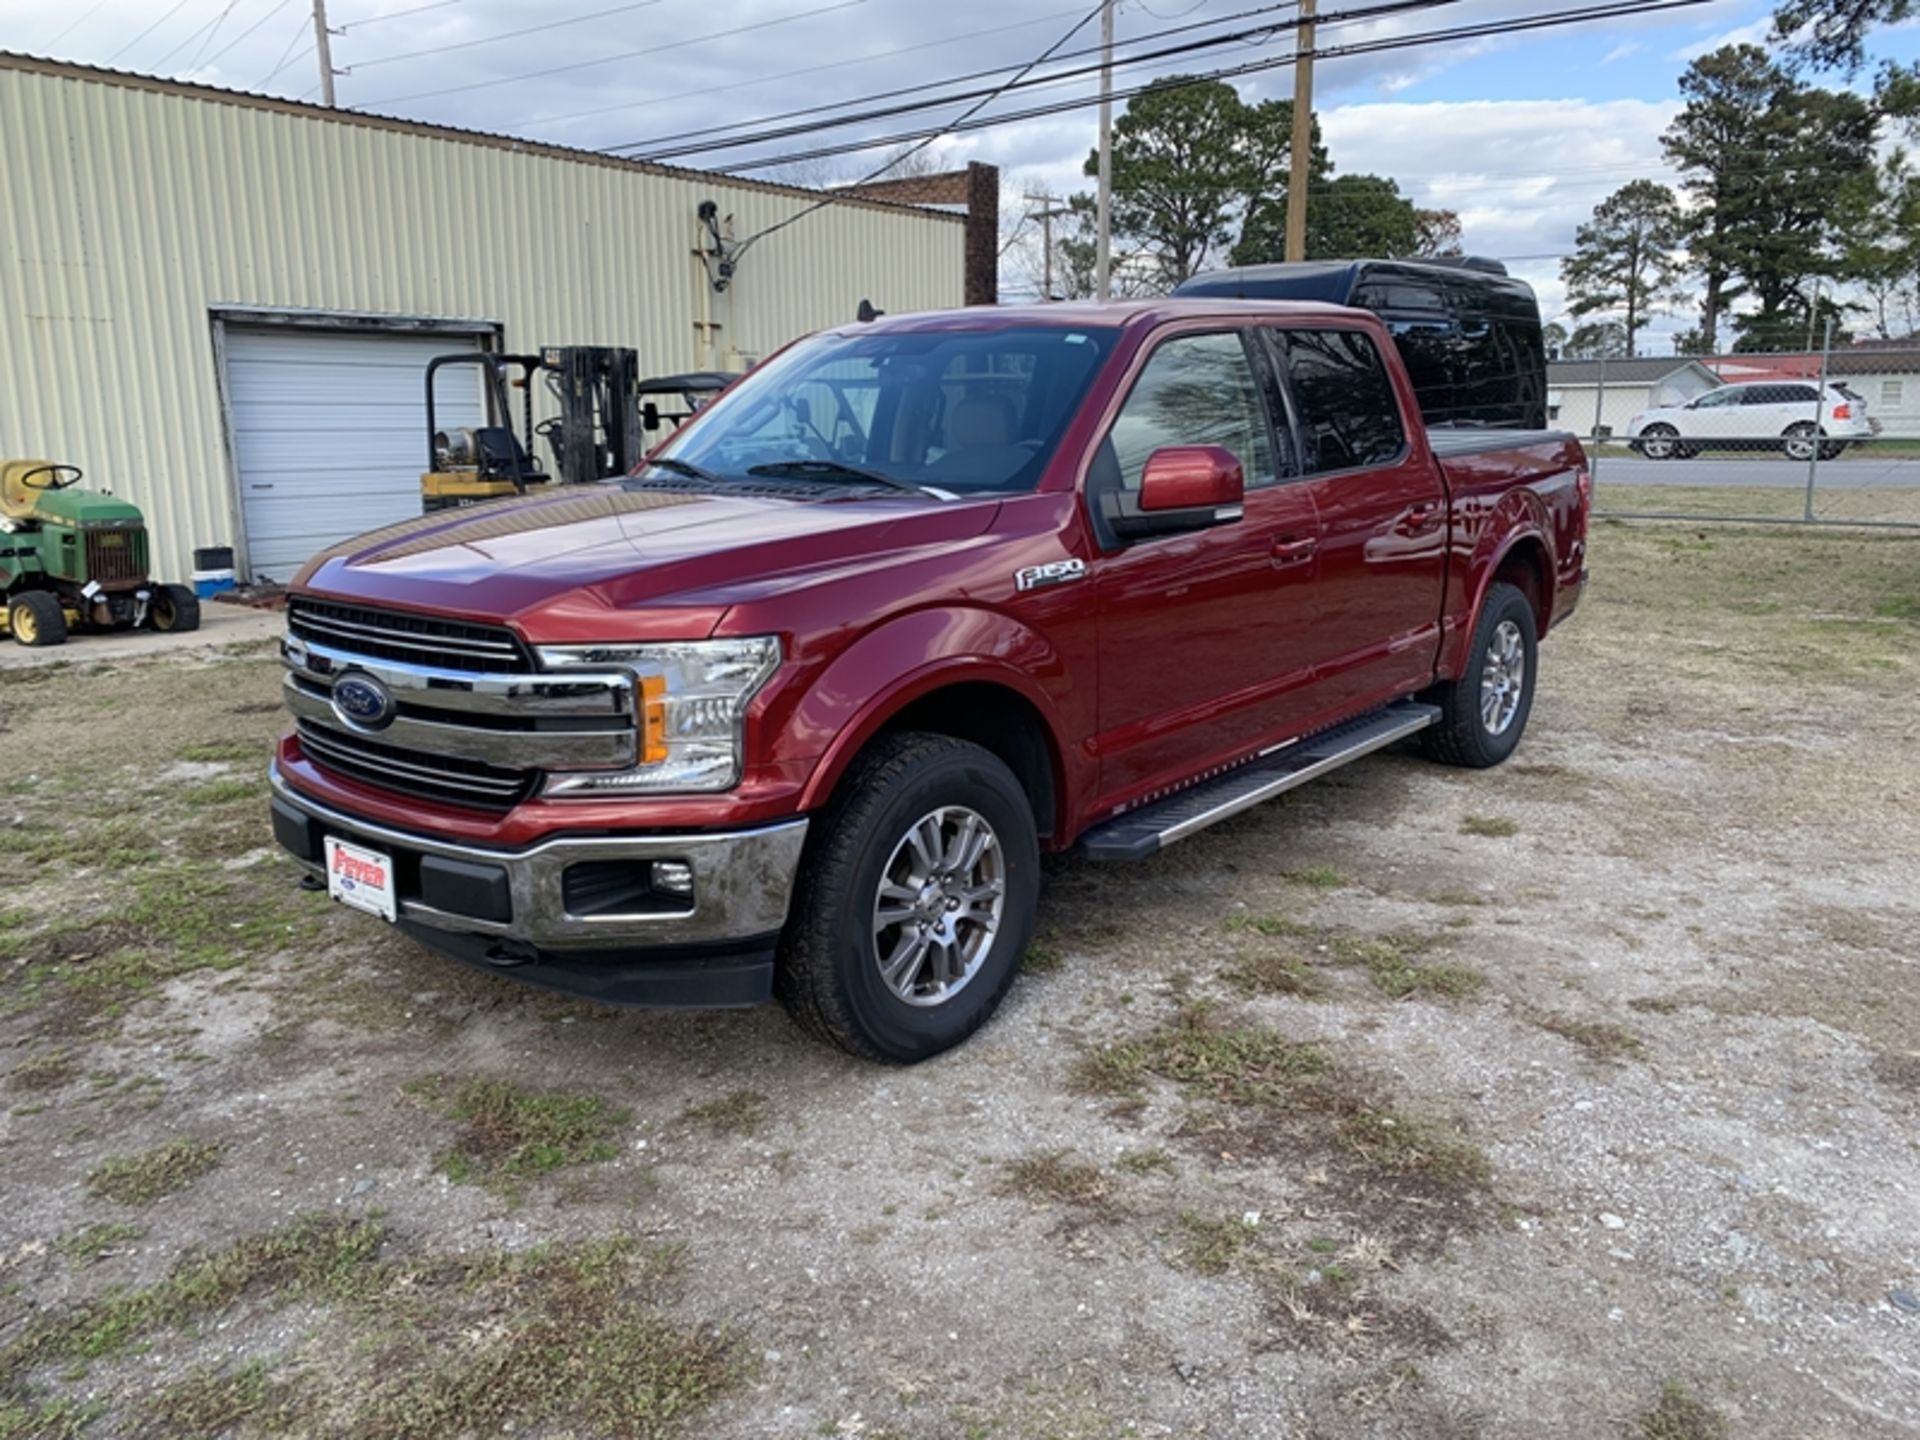 2019 FORD F150 Lariat, crew cab, 4WD, 2.7L, V6, bed cover - 87,890 miles showing -